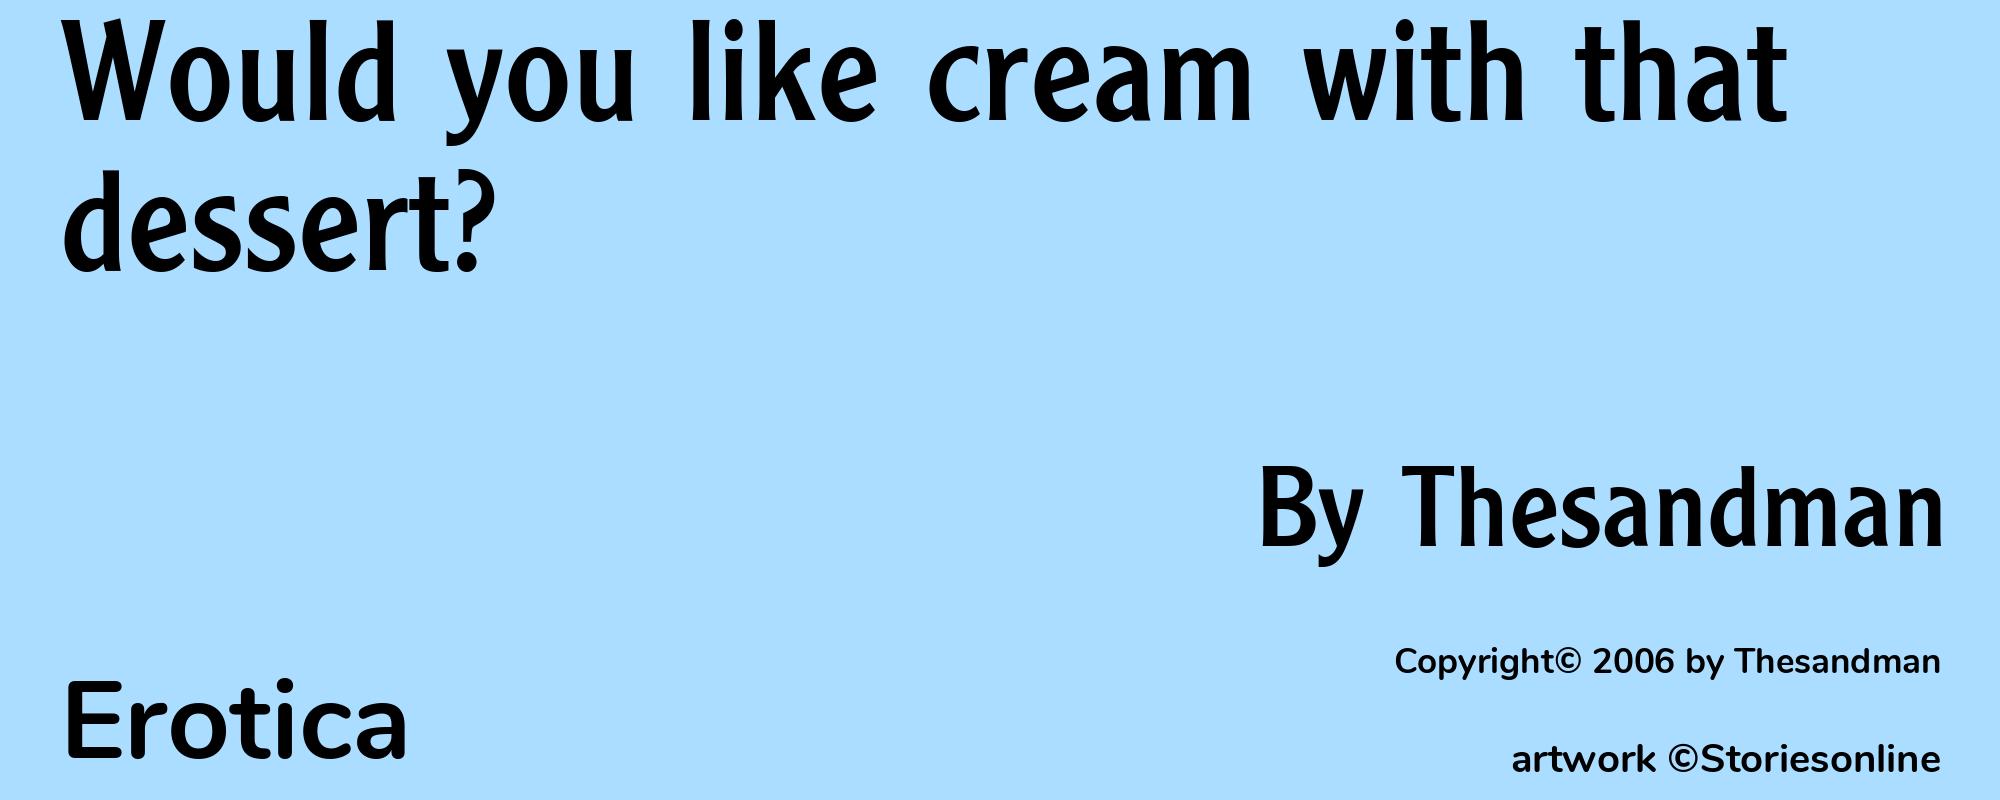 Would you like cream with that dessert? - Cover